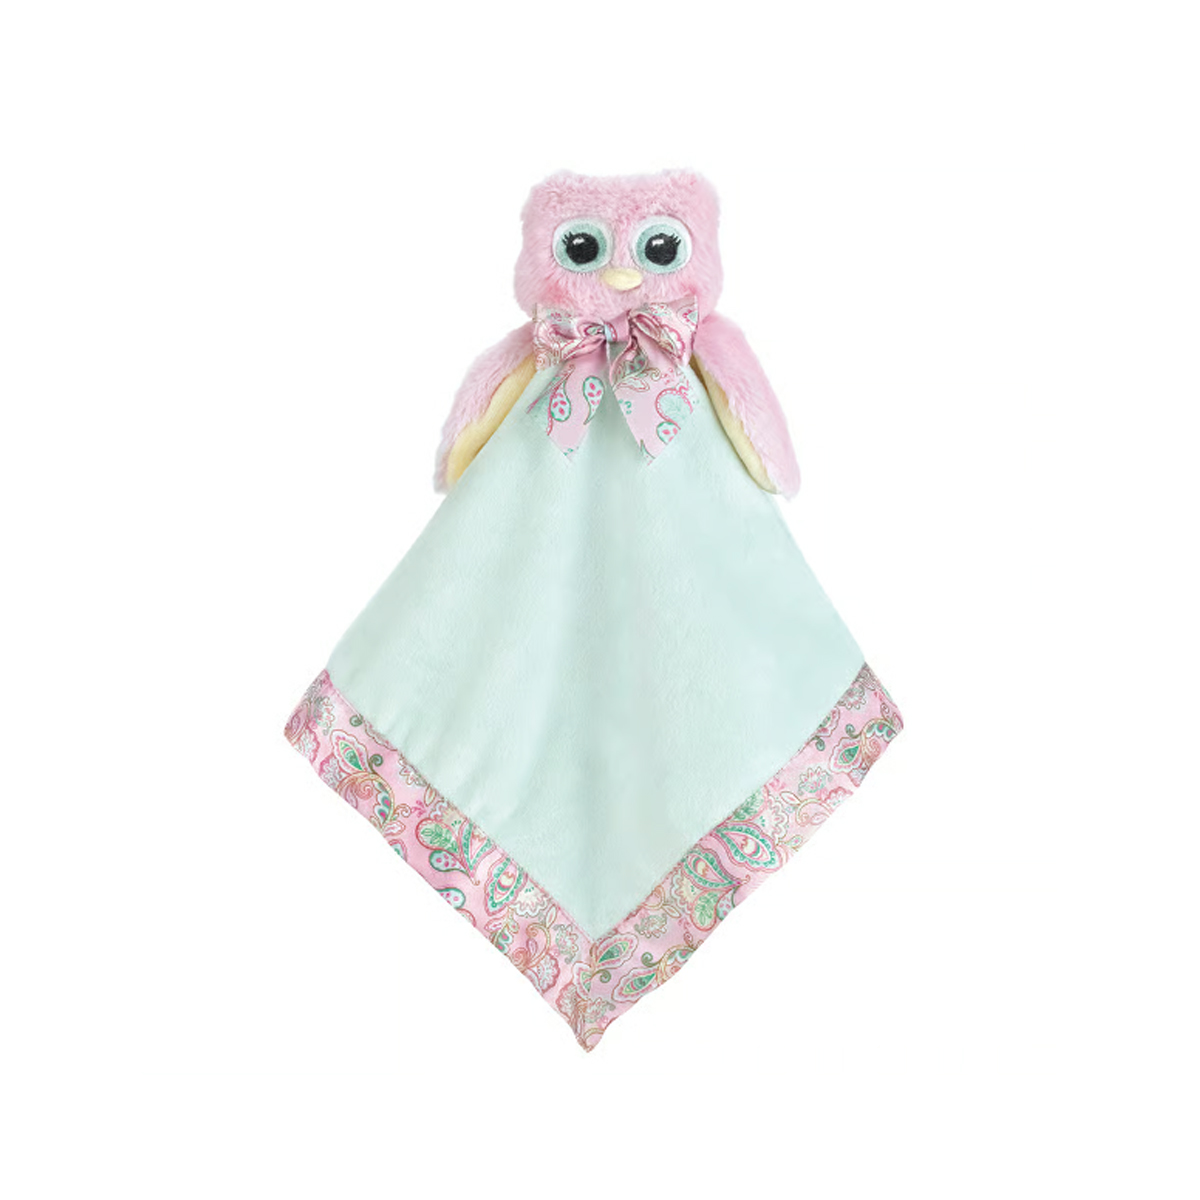 Lil' Hoots Pink Owl Snuggy